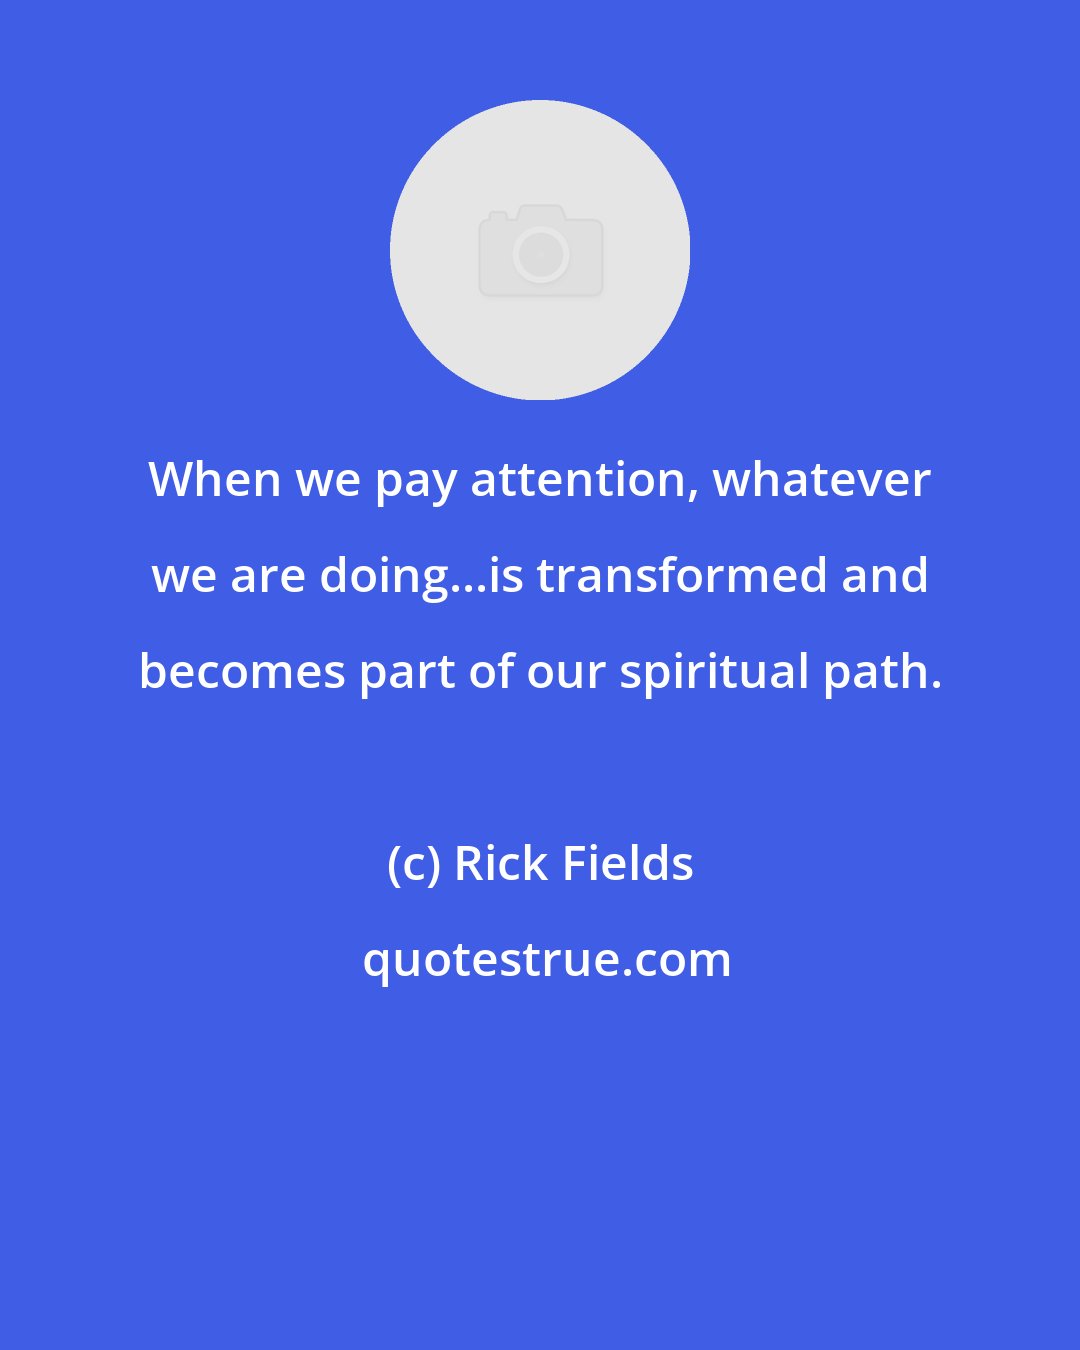 Rick Fields: When we pay attention, whatever we are doing...is transformed and becomes part of our spiritual path.